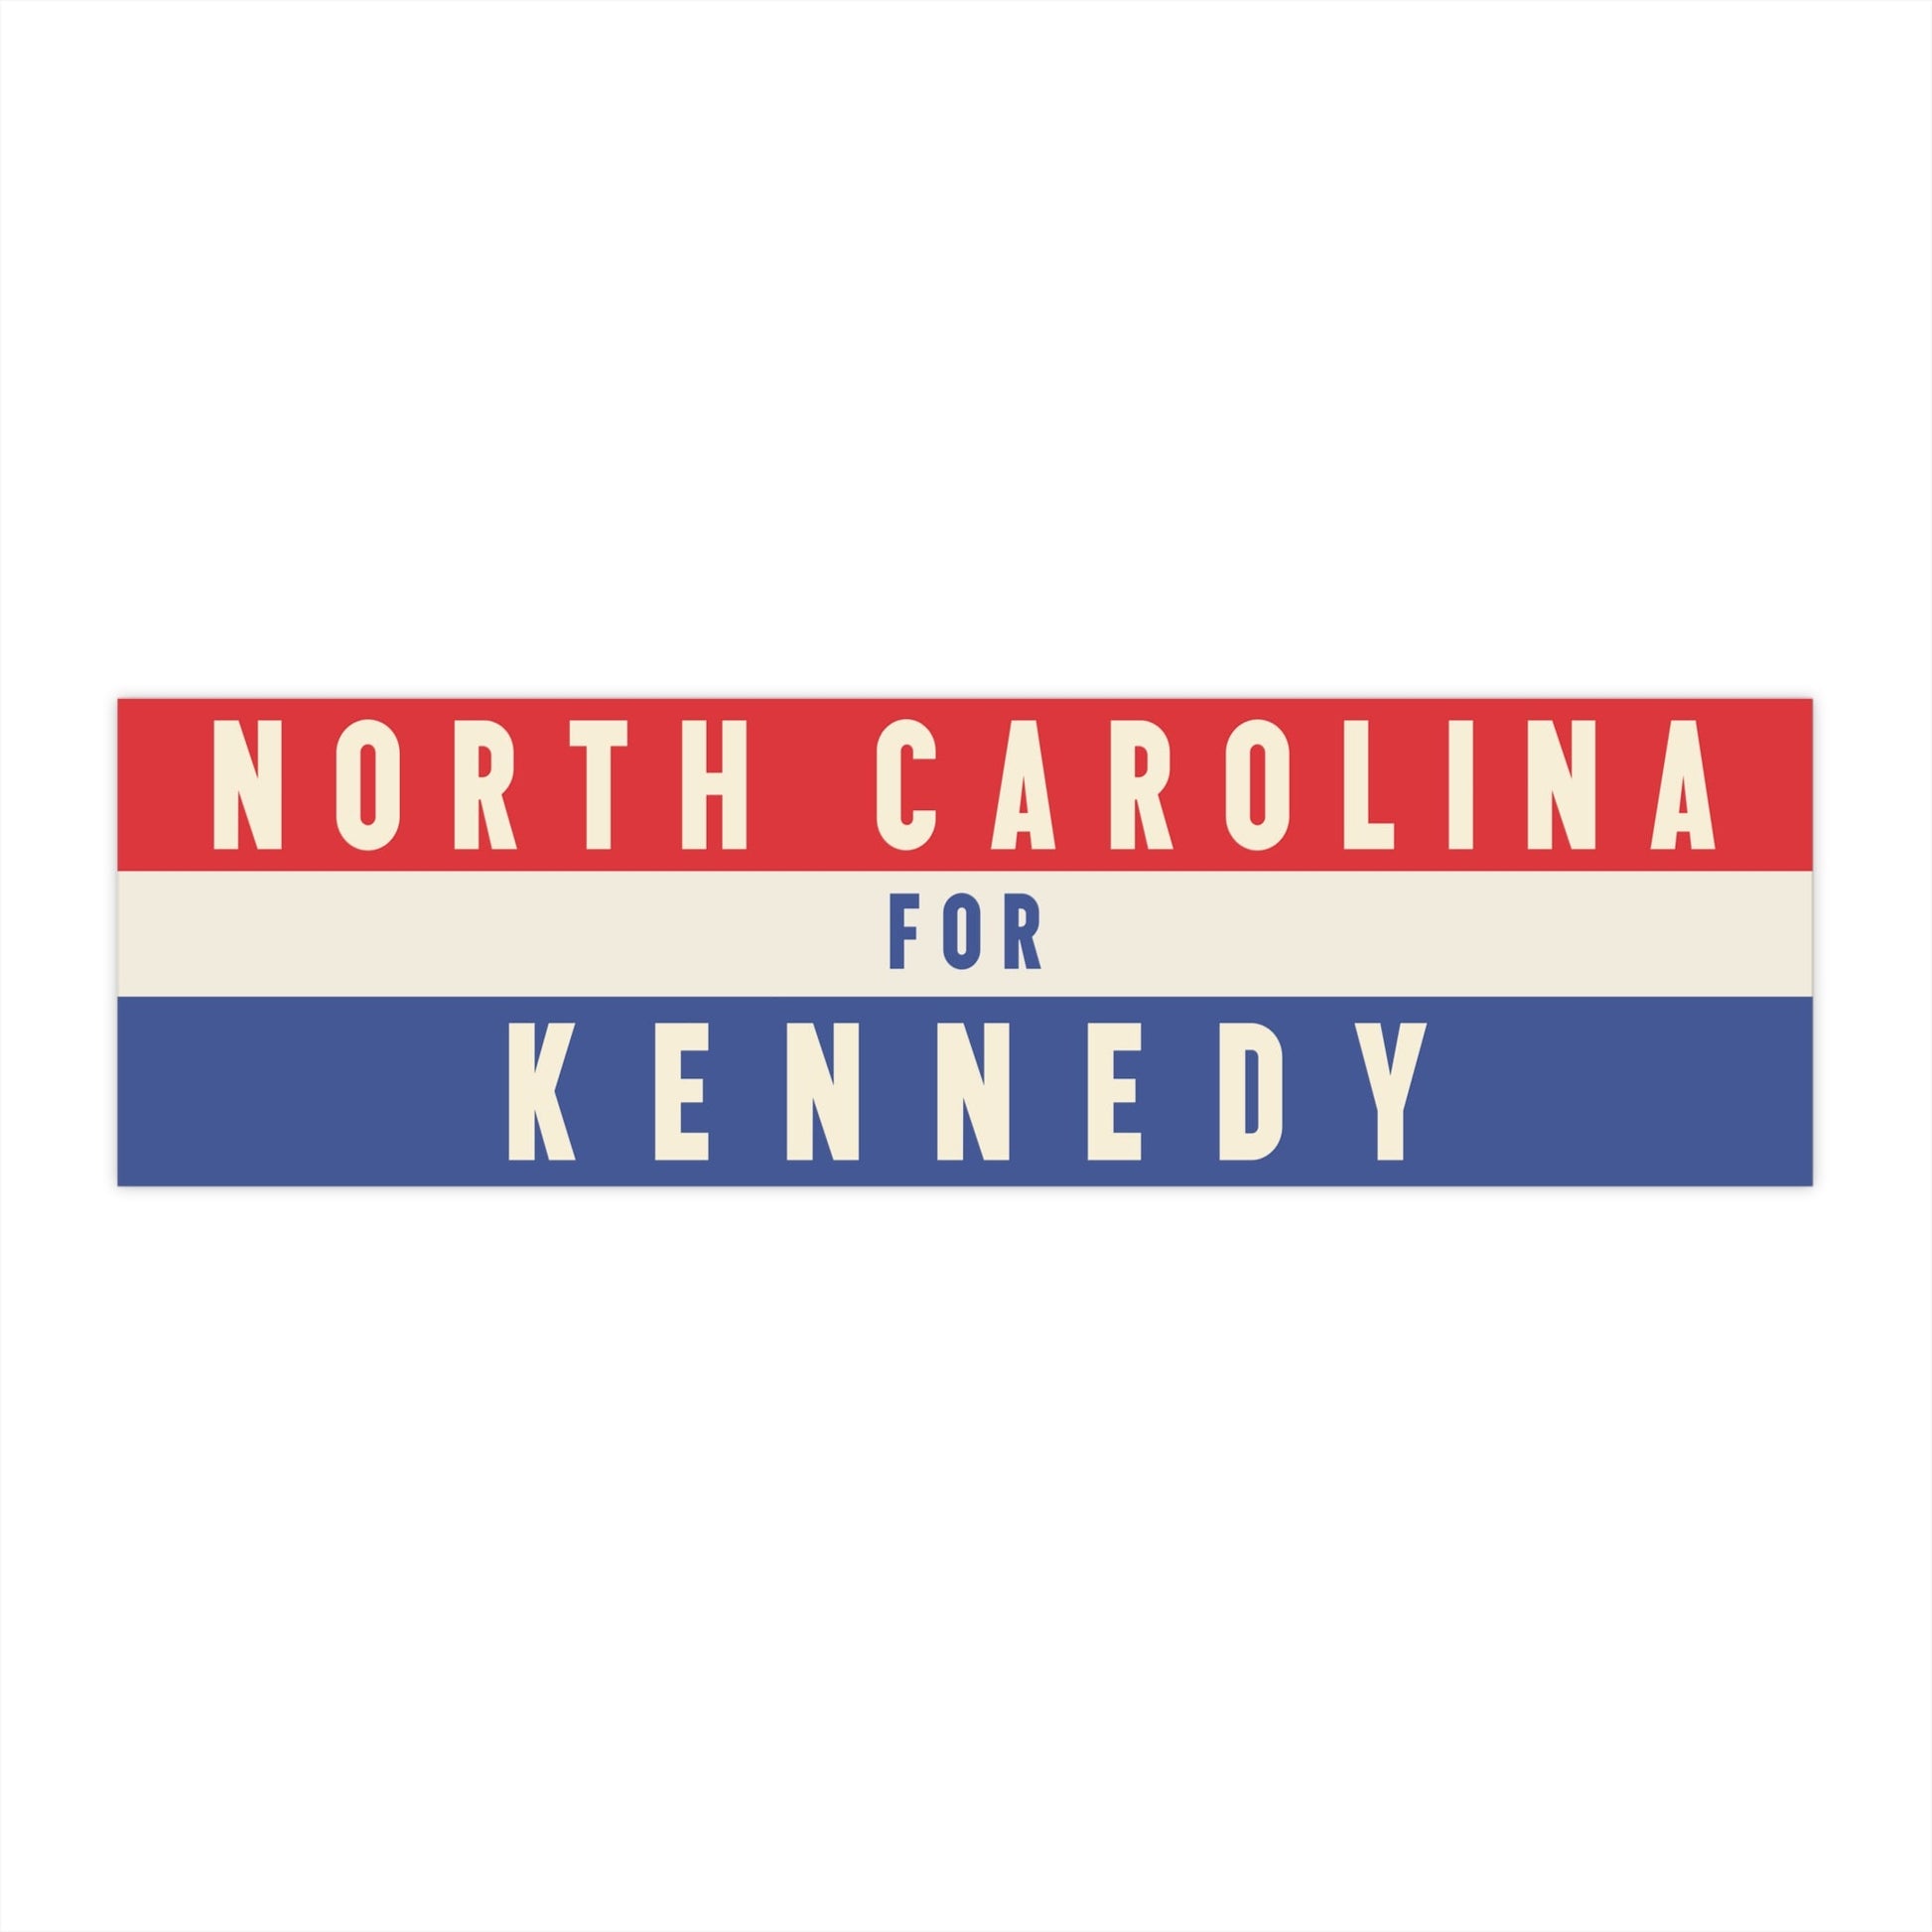 North Carolina for Kennedy Bumper Sticker - TEAM KENNEDY. All rights reserved